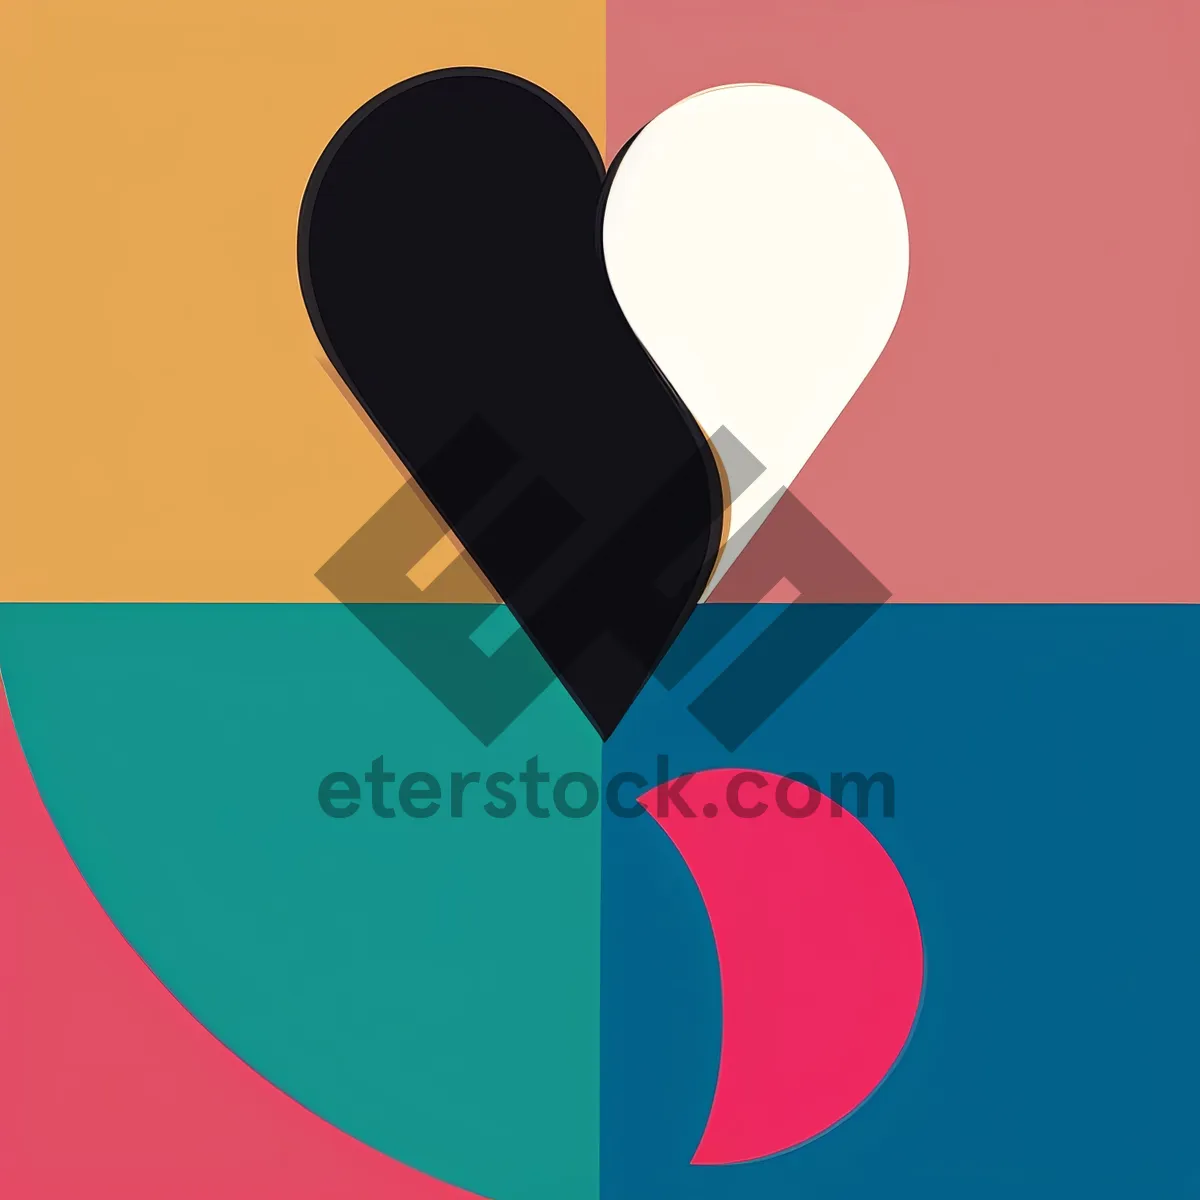 Picture of Love Symbol: Artistic Valentine Icon of Heart-shaped Romance